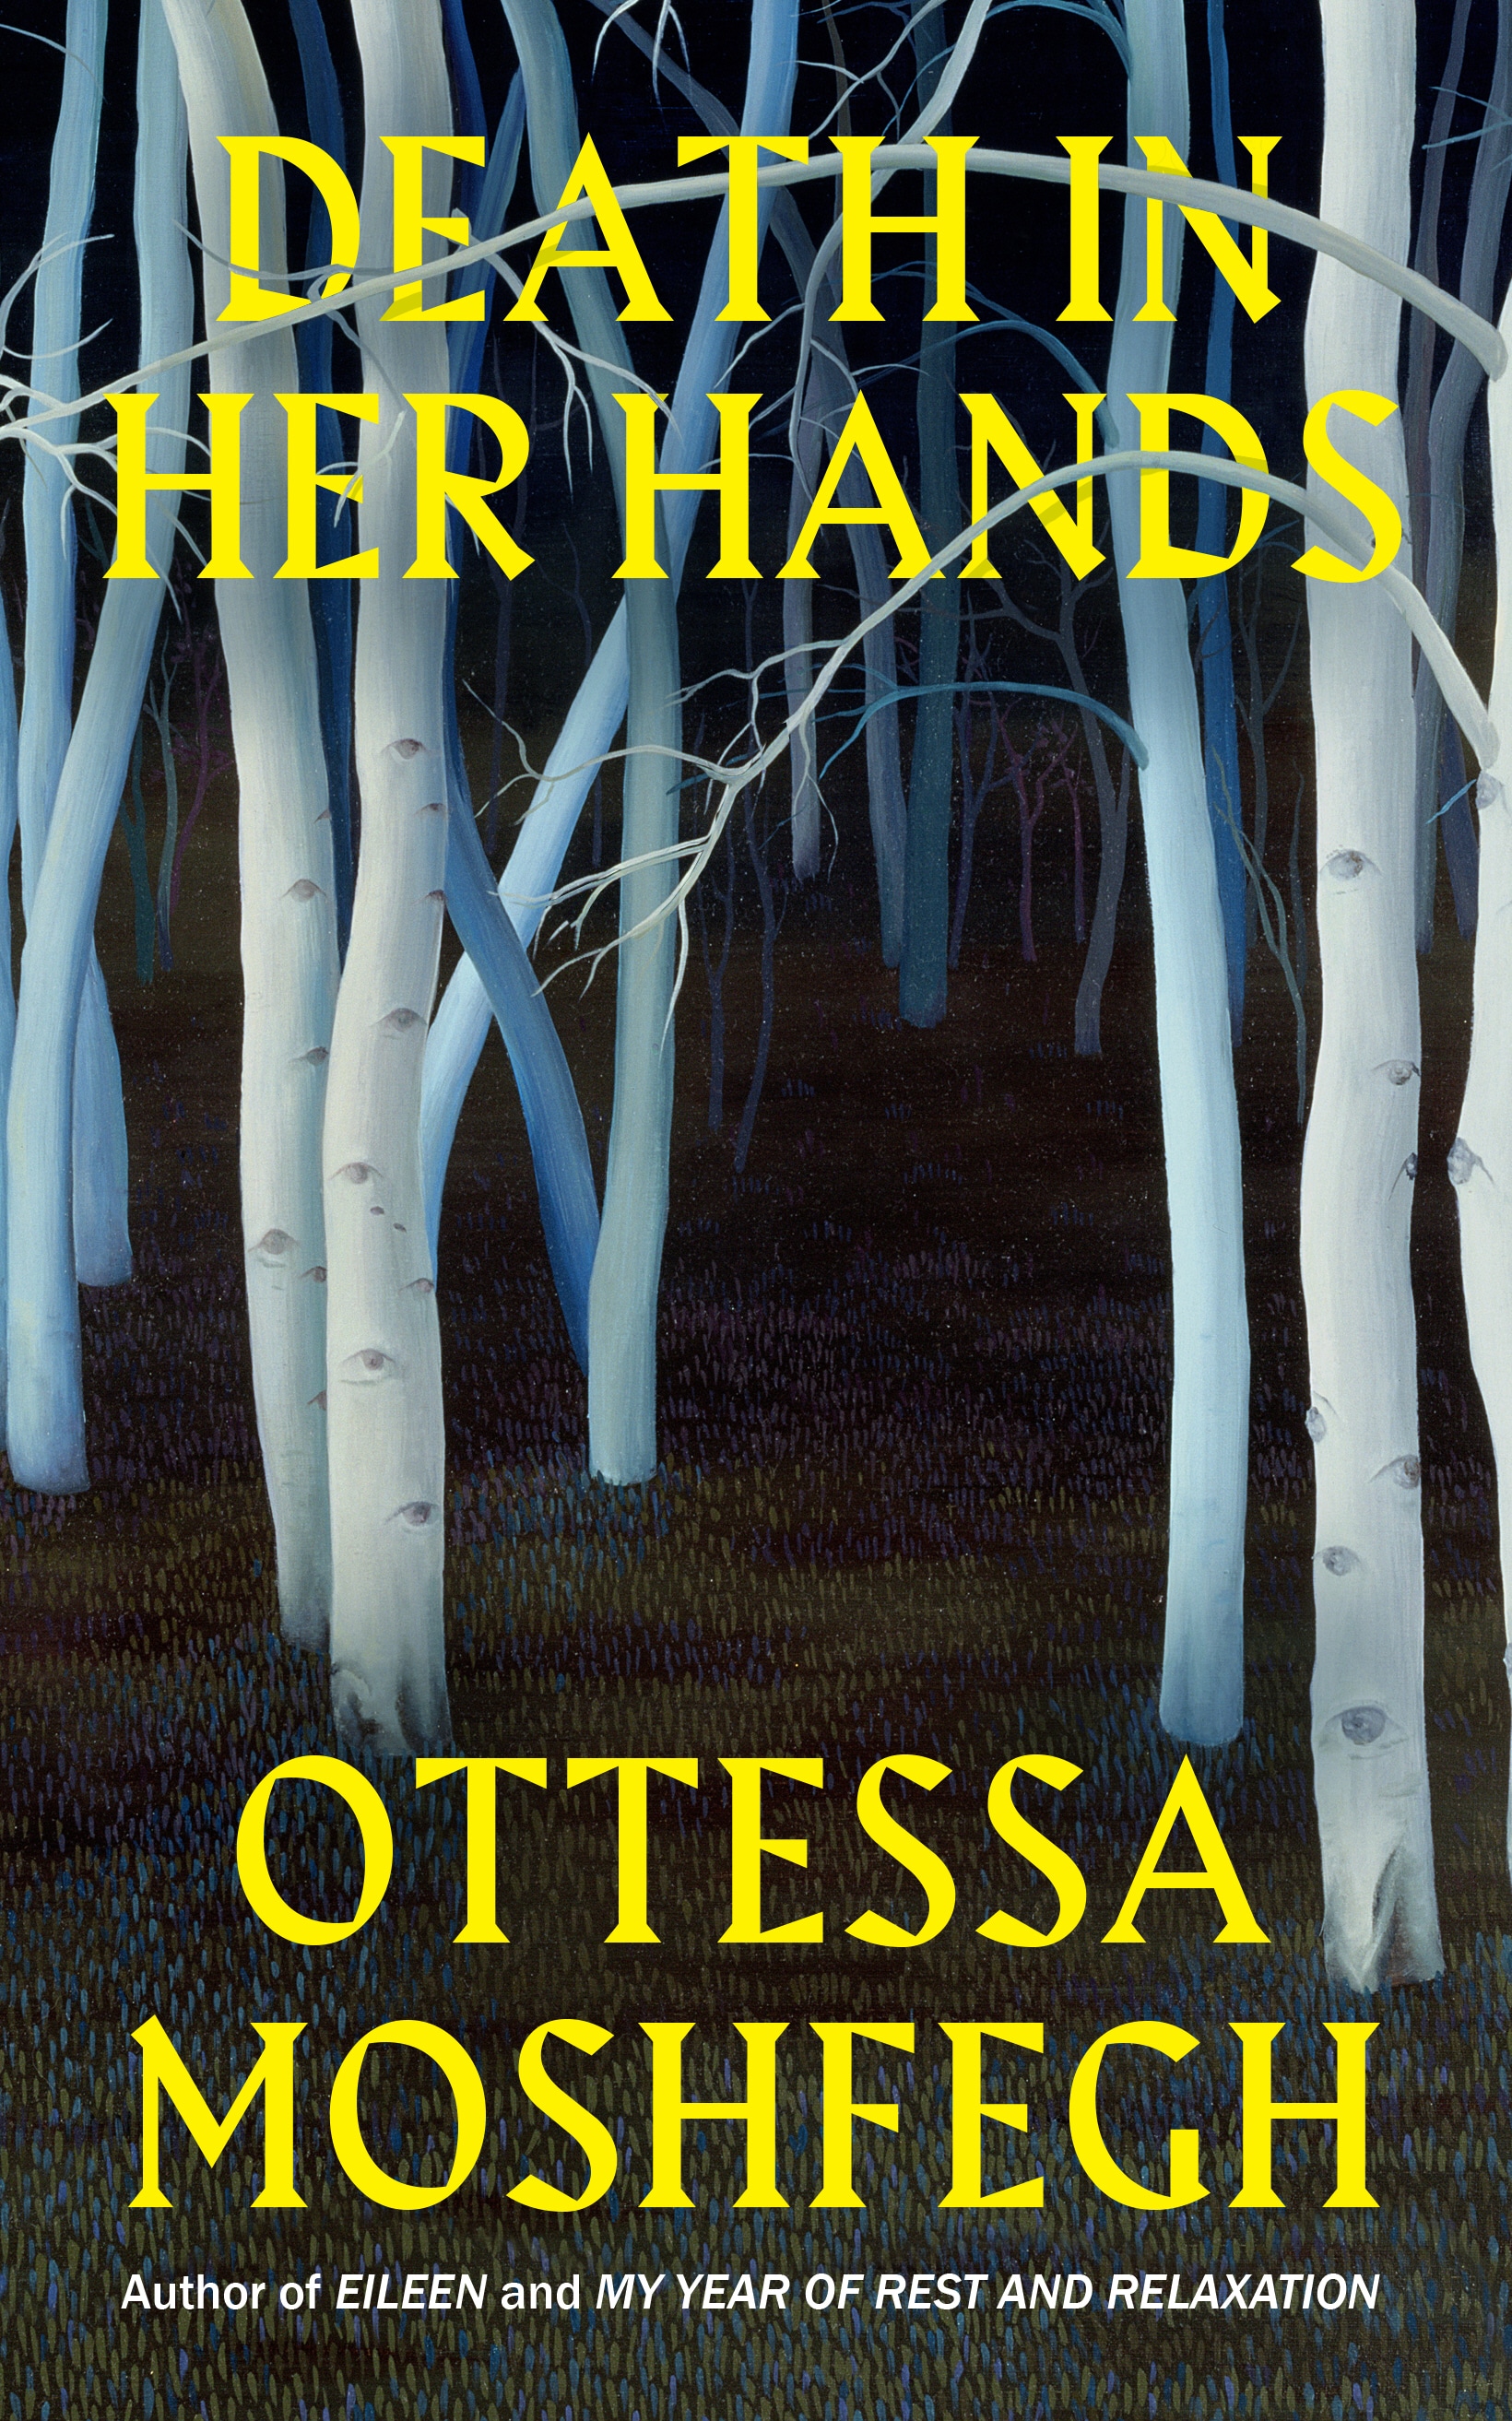 Book “Death in Her Hands” by Ottessa Moshfegh — August 27, 2020